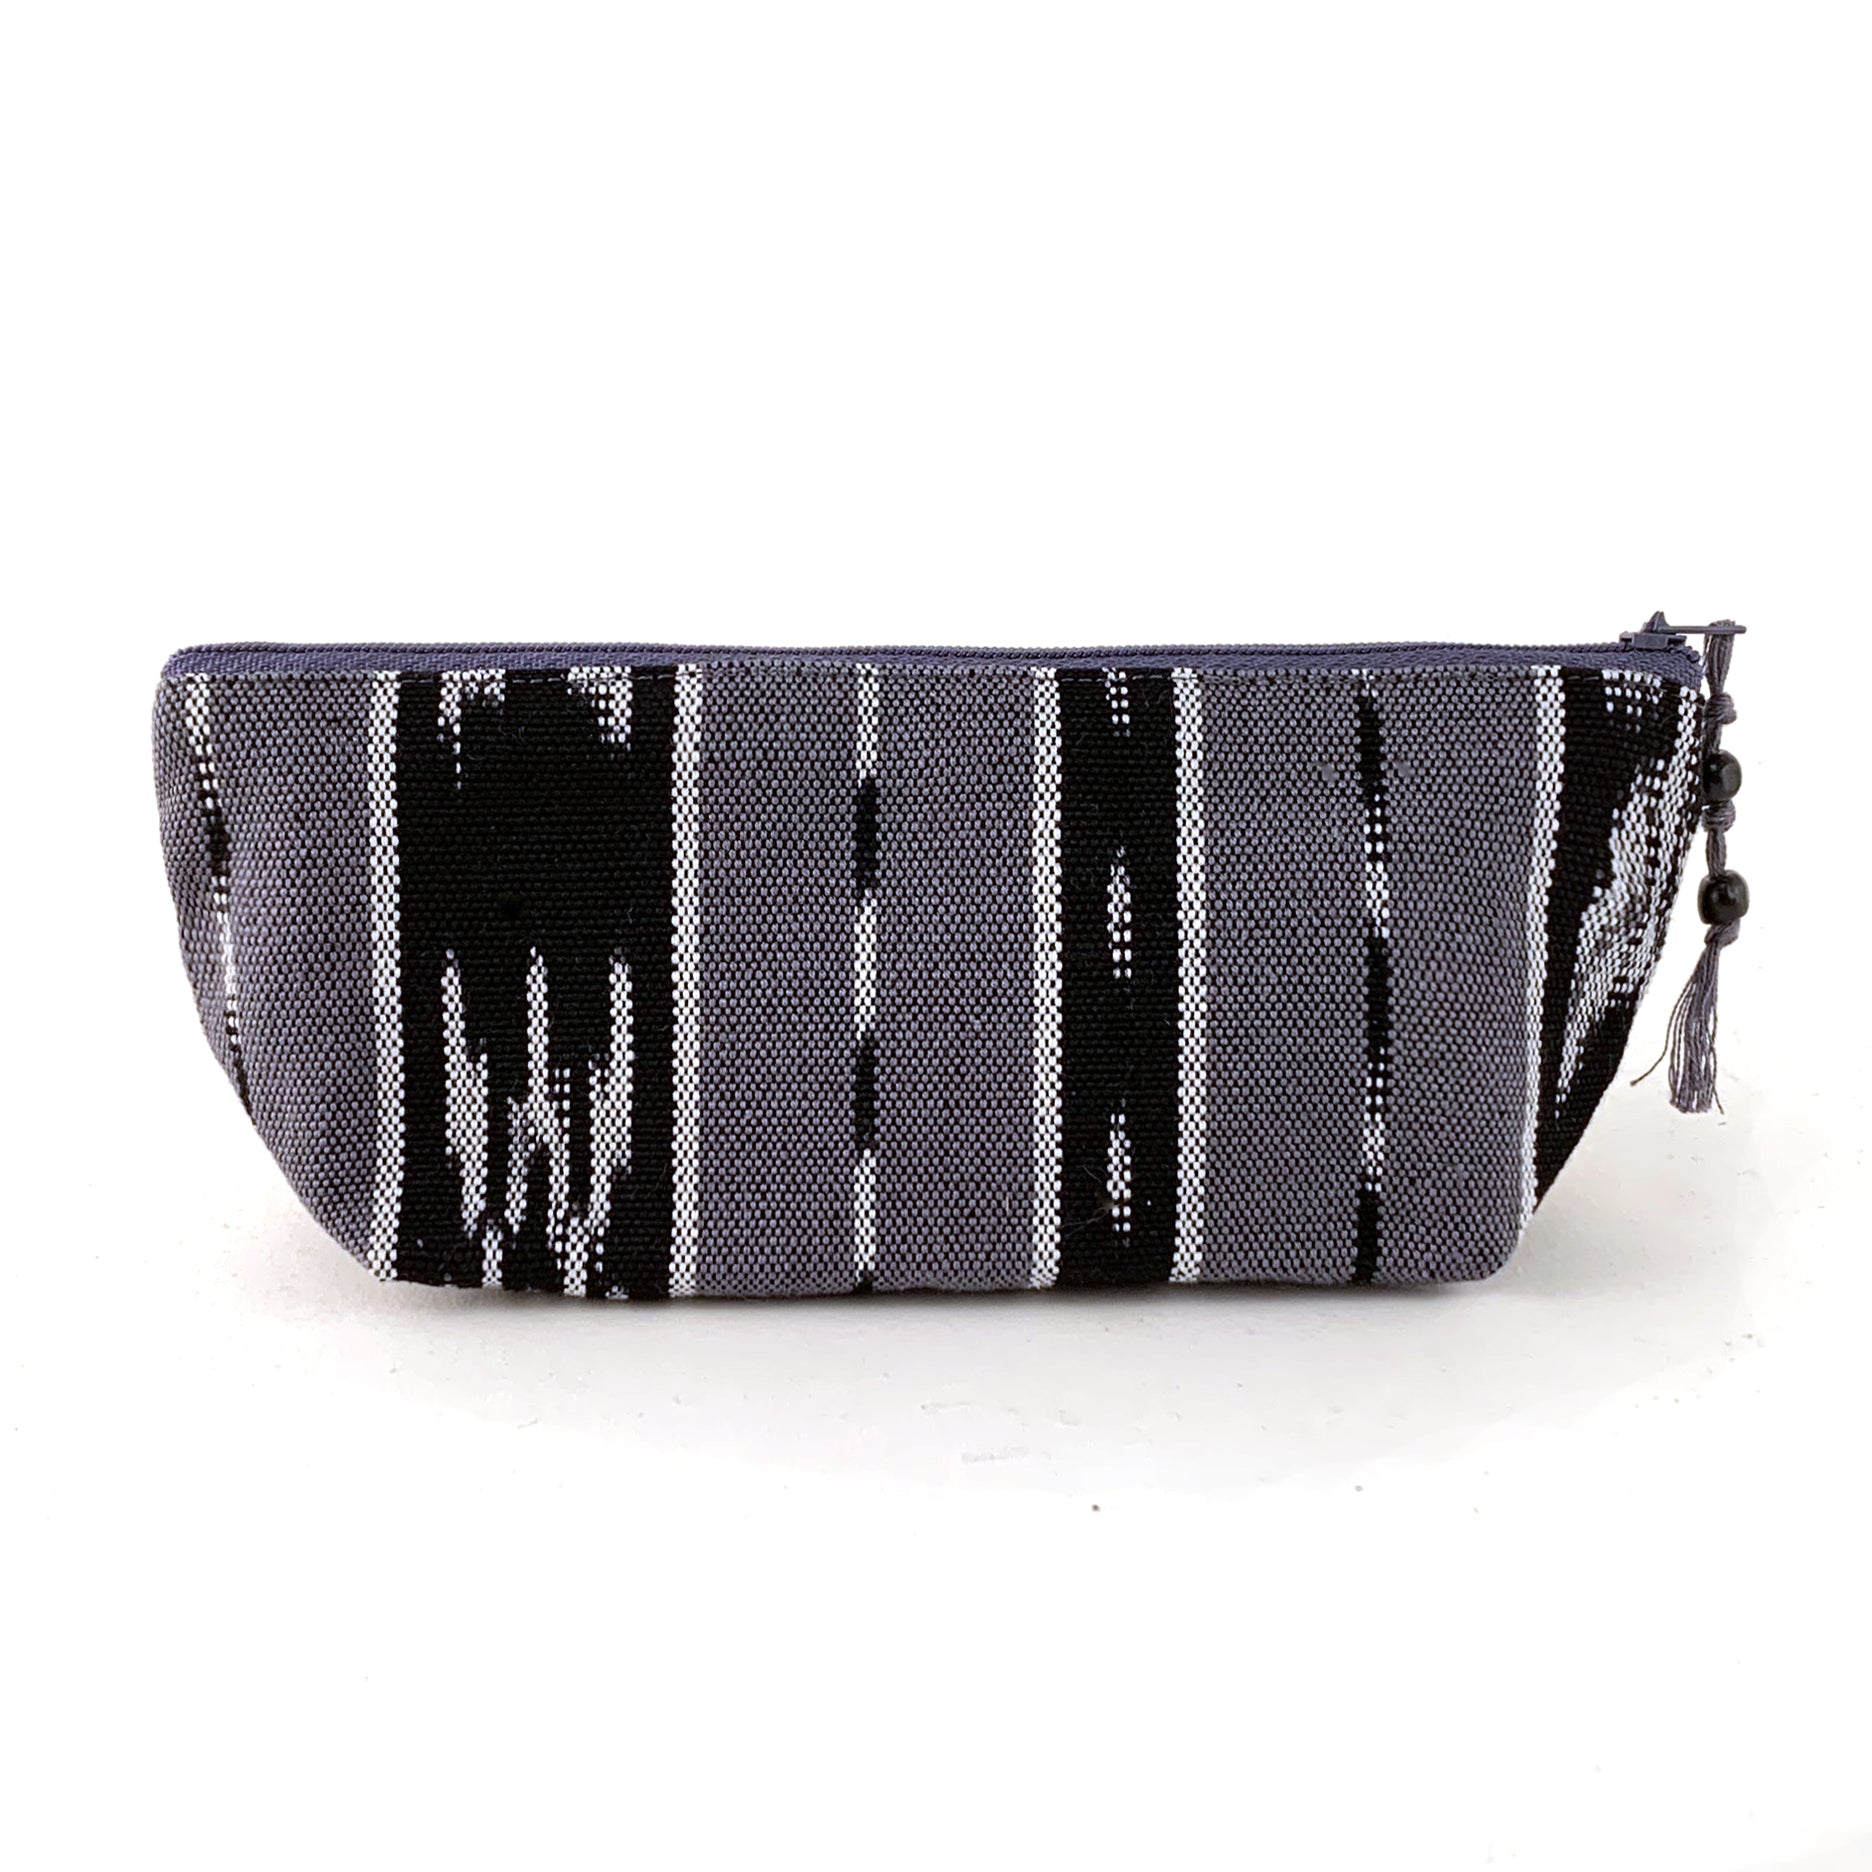 Expensive Pencil Case Pouch Black & White Grid Color Perfect for